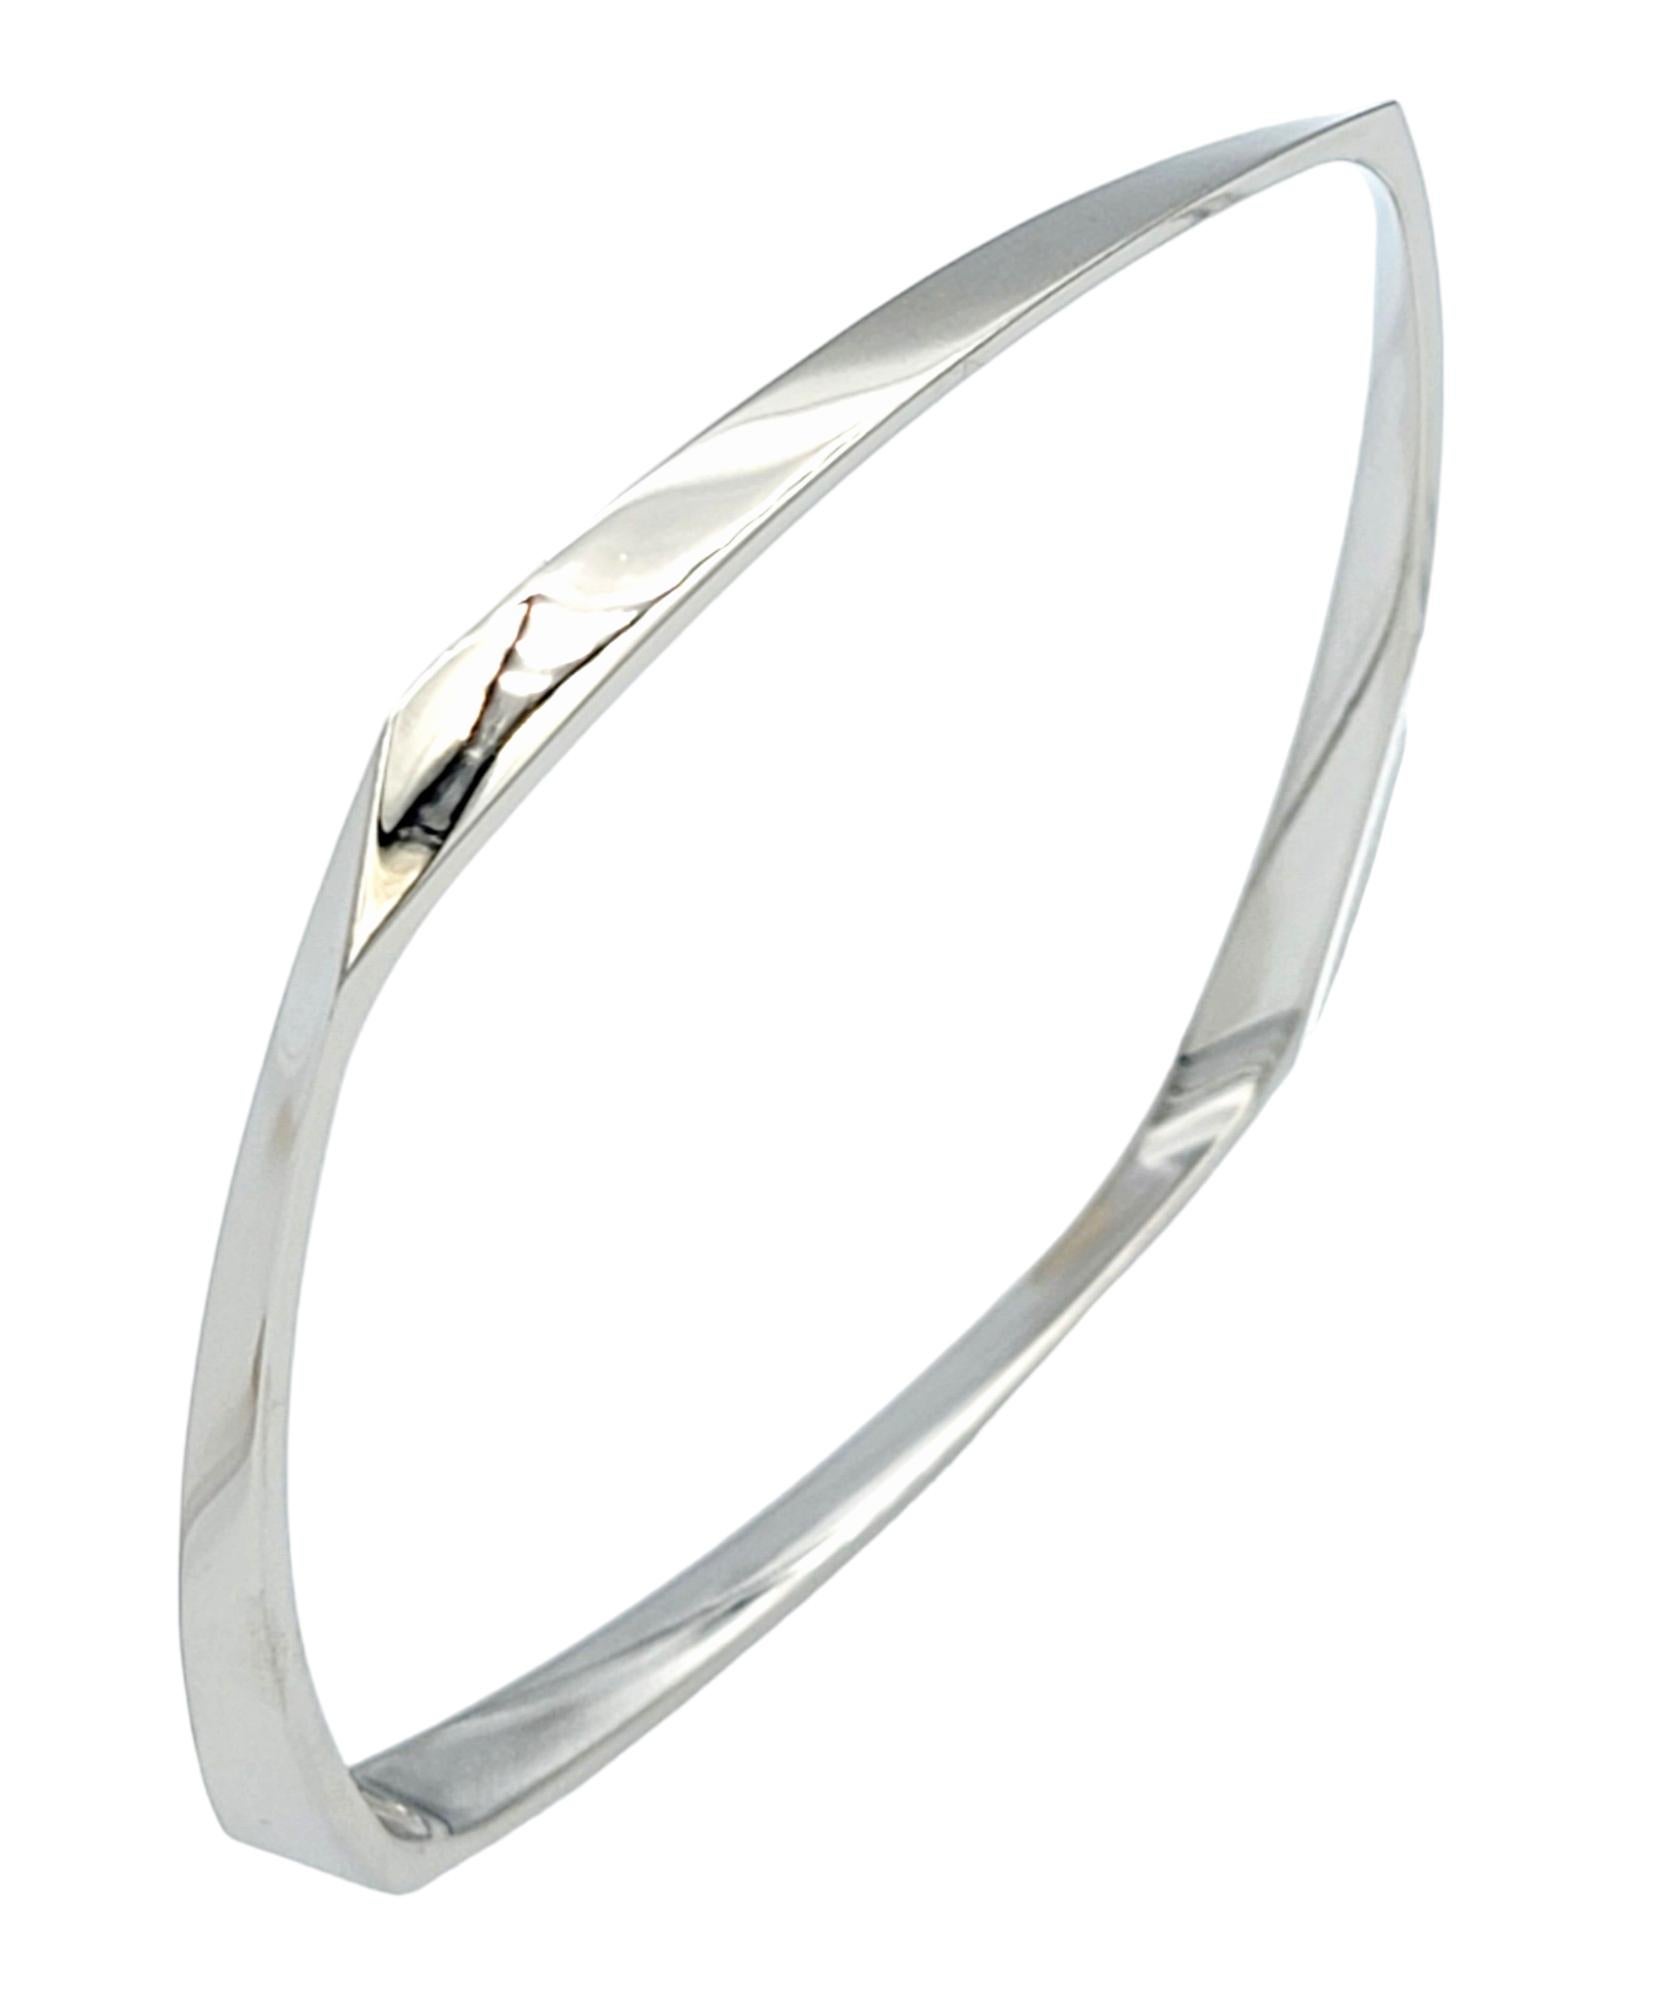 Frank Ghery for Tiffany & Co. Squared Twist Bangle Bracelet 18 Karat White Gold In Excellent Condition For Sale In Scottsdale, AZ